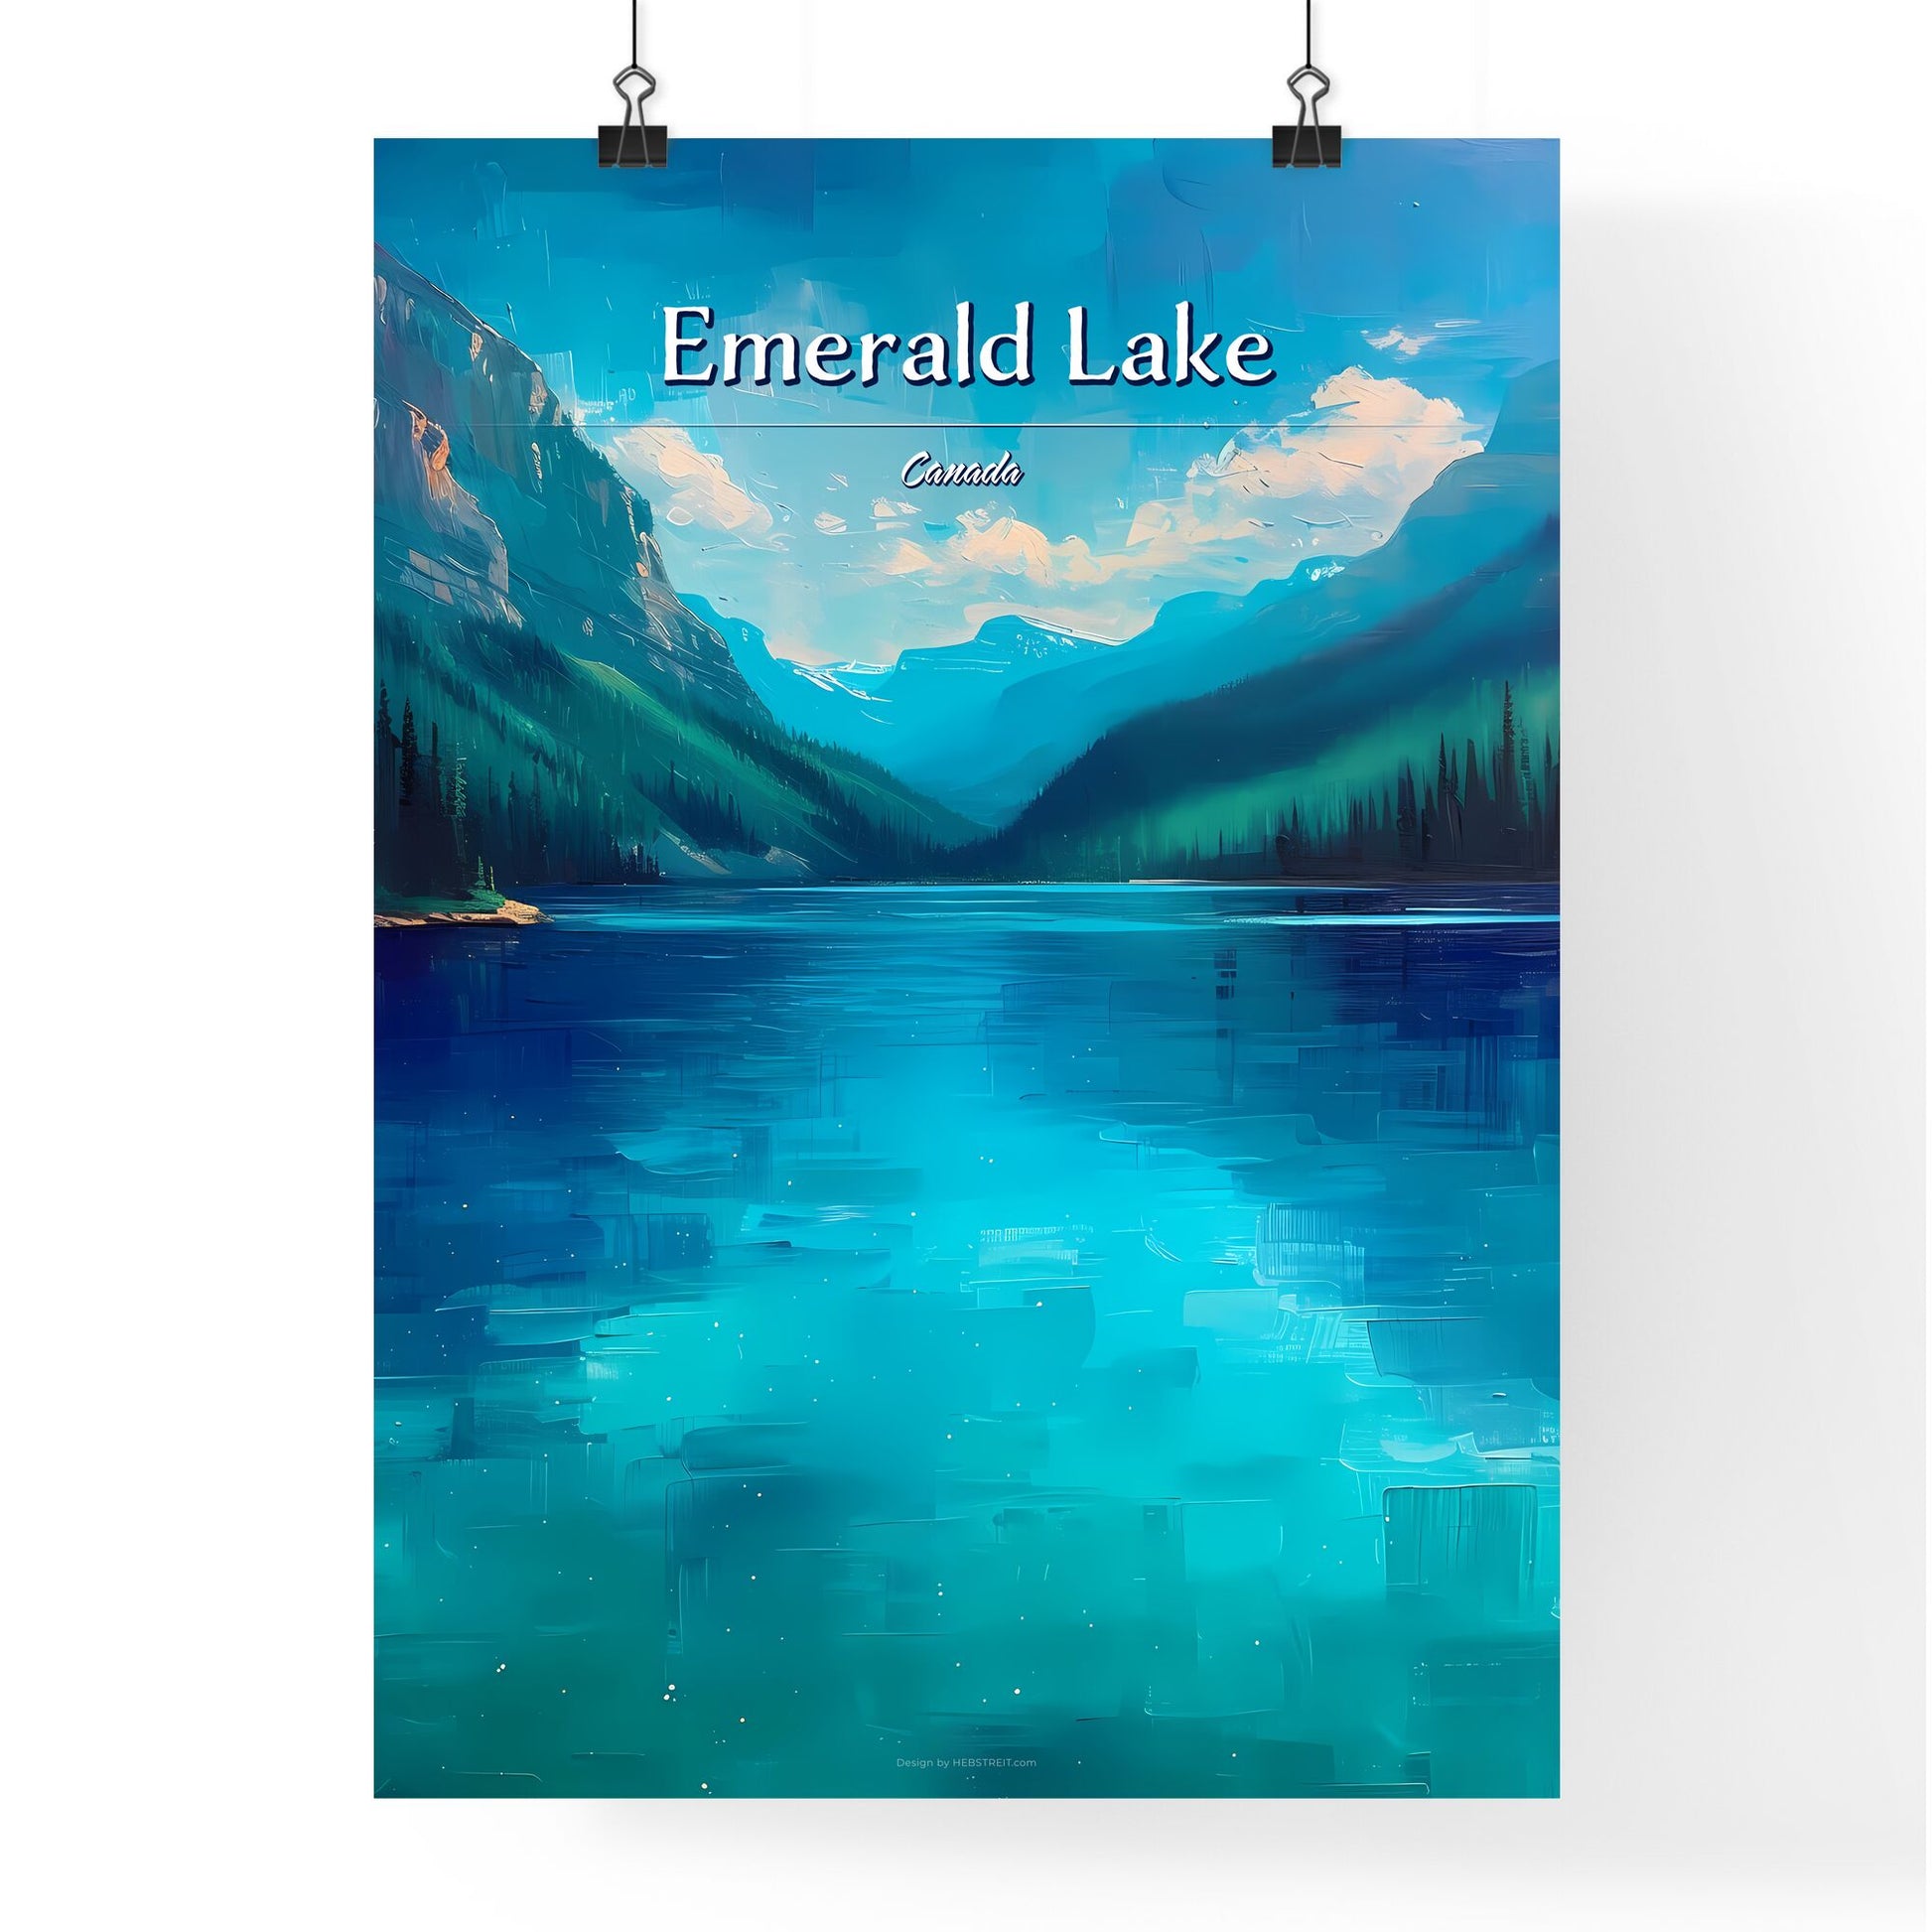 Emerald Lake, Canada - Art print of a man with ivy on his head Default Title